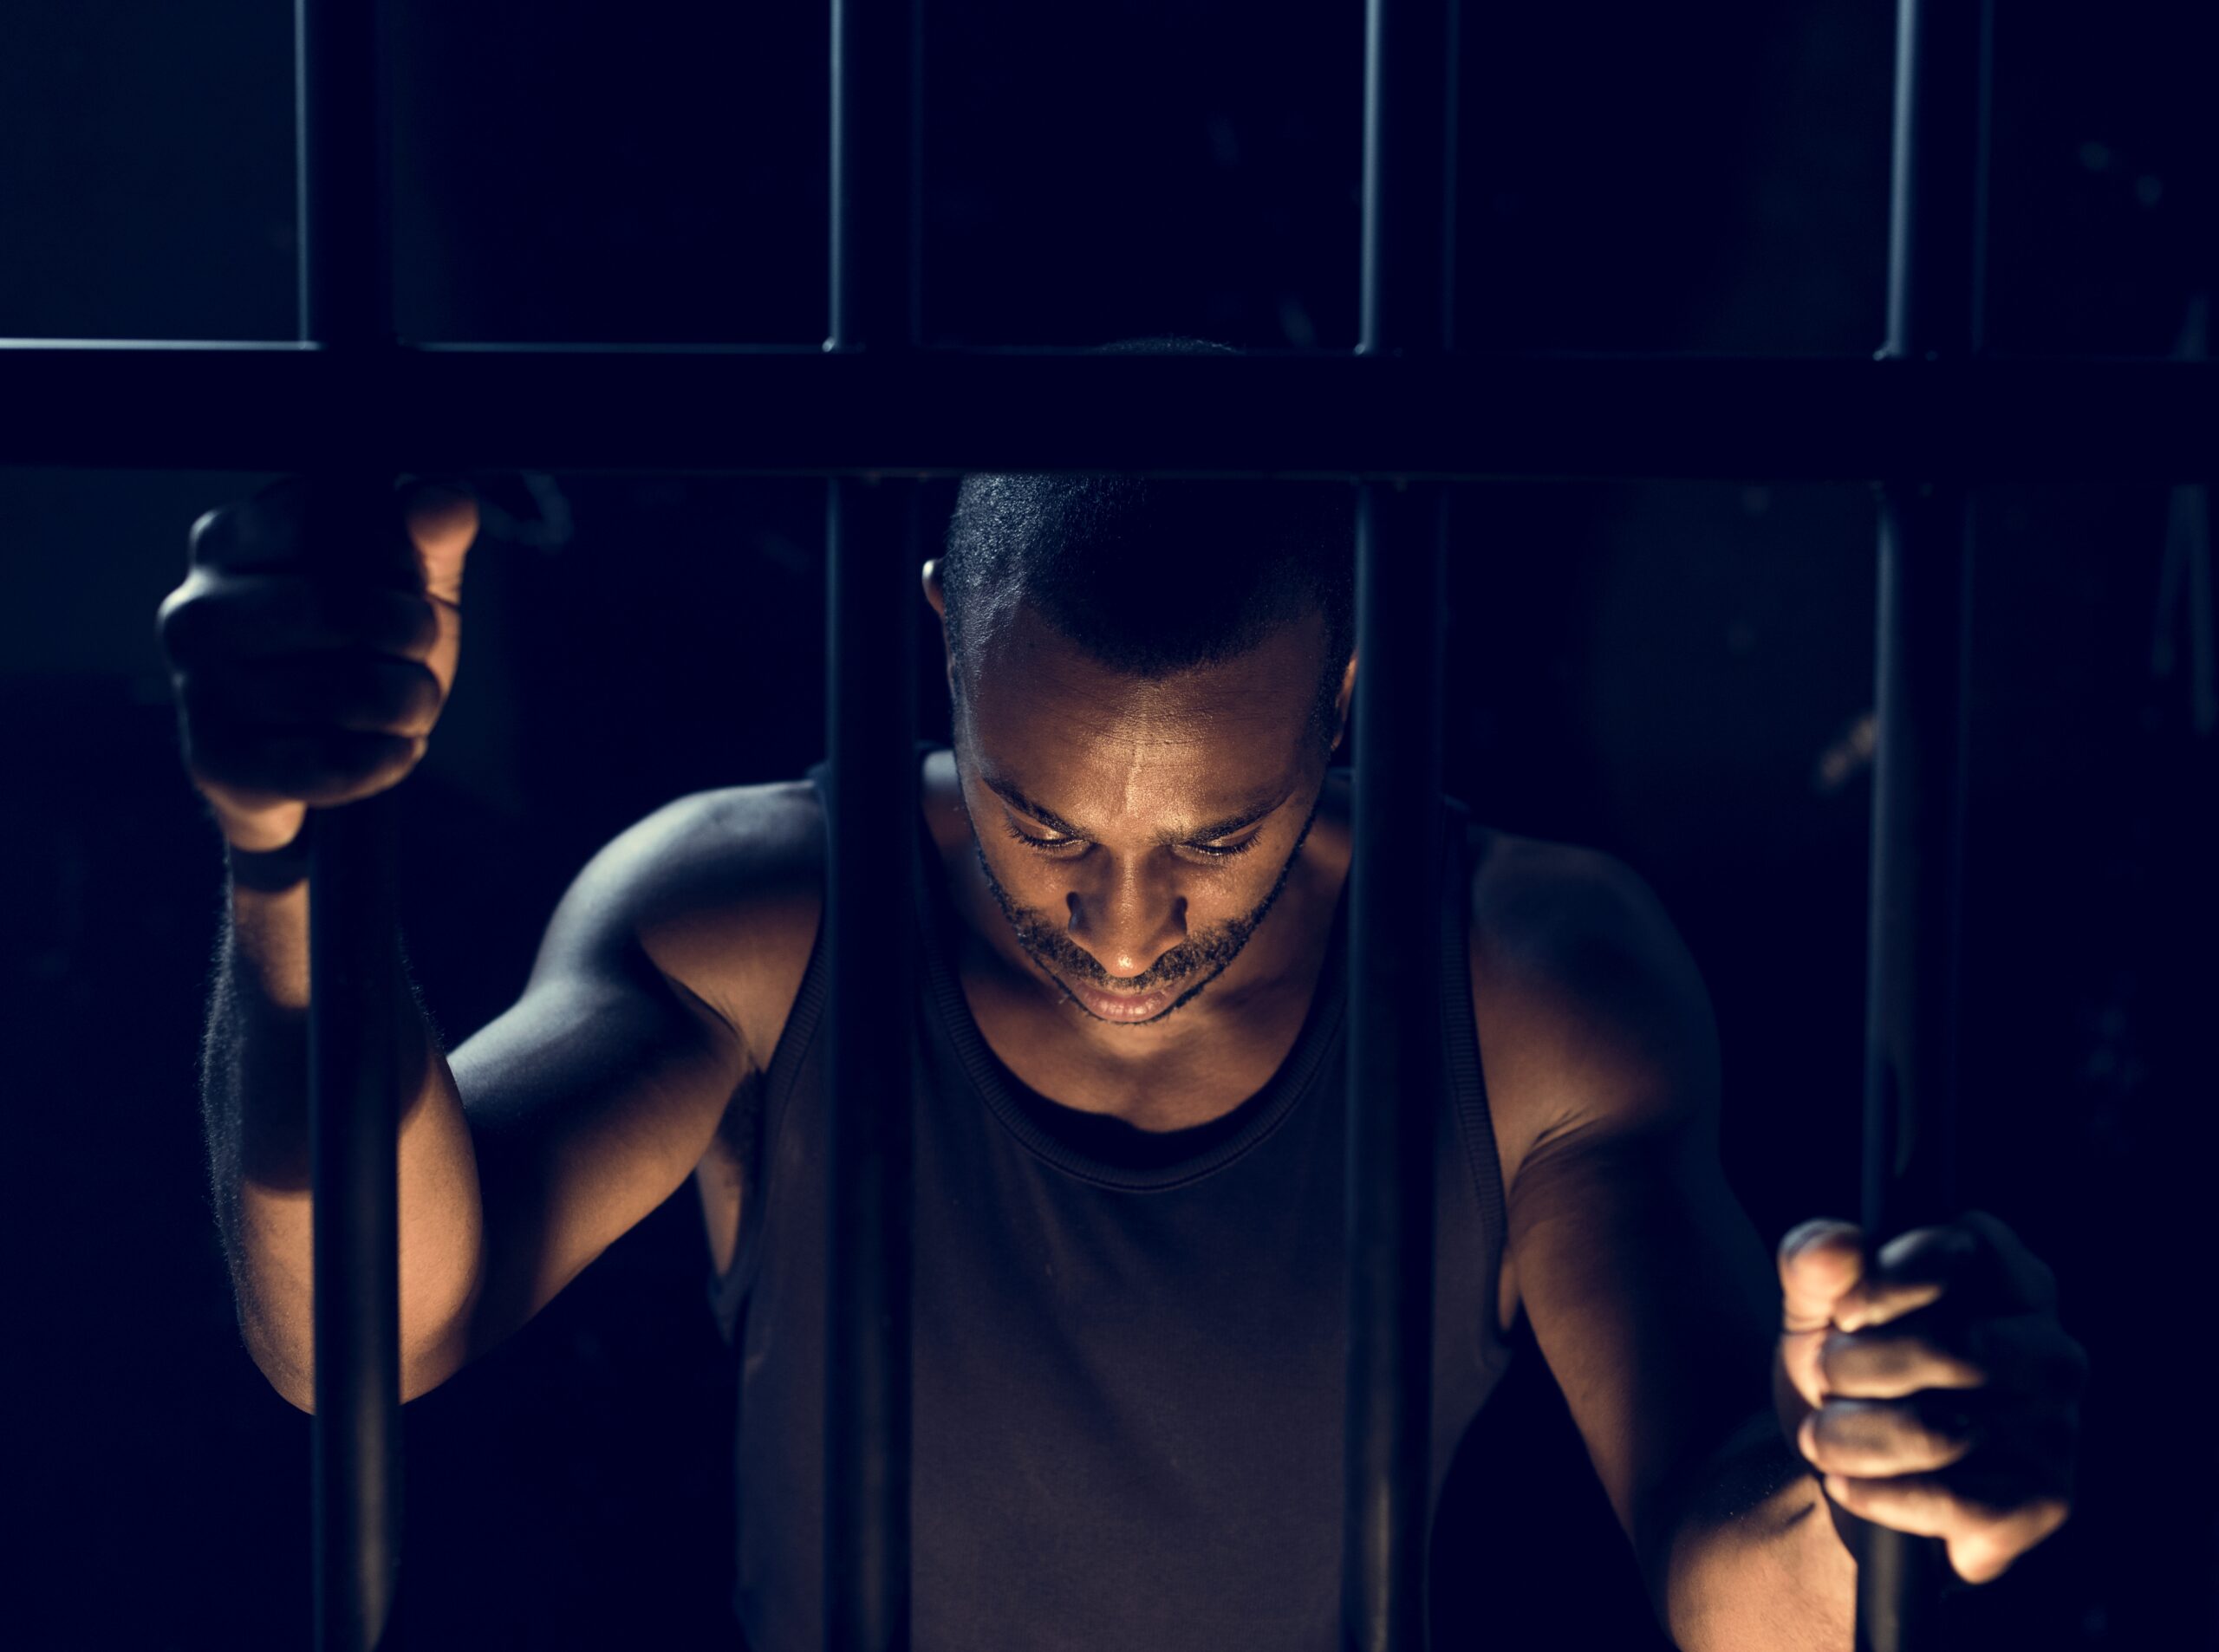 avoid extra time in jail and hire a affordable bail review lawyer if your bail is denied. 